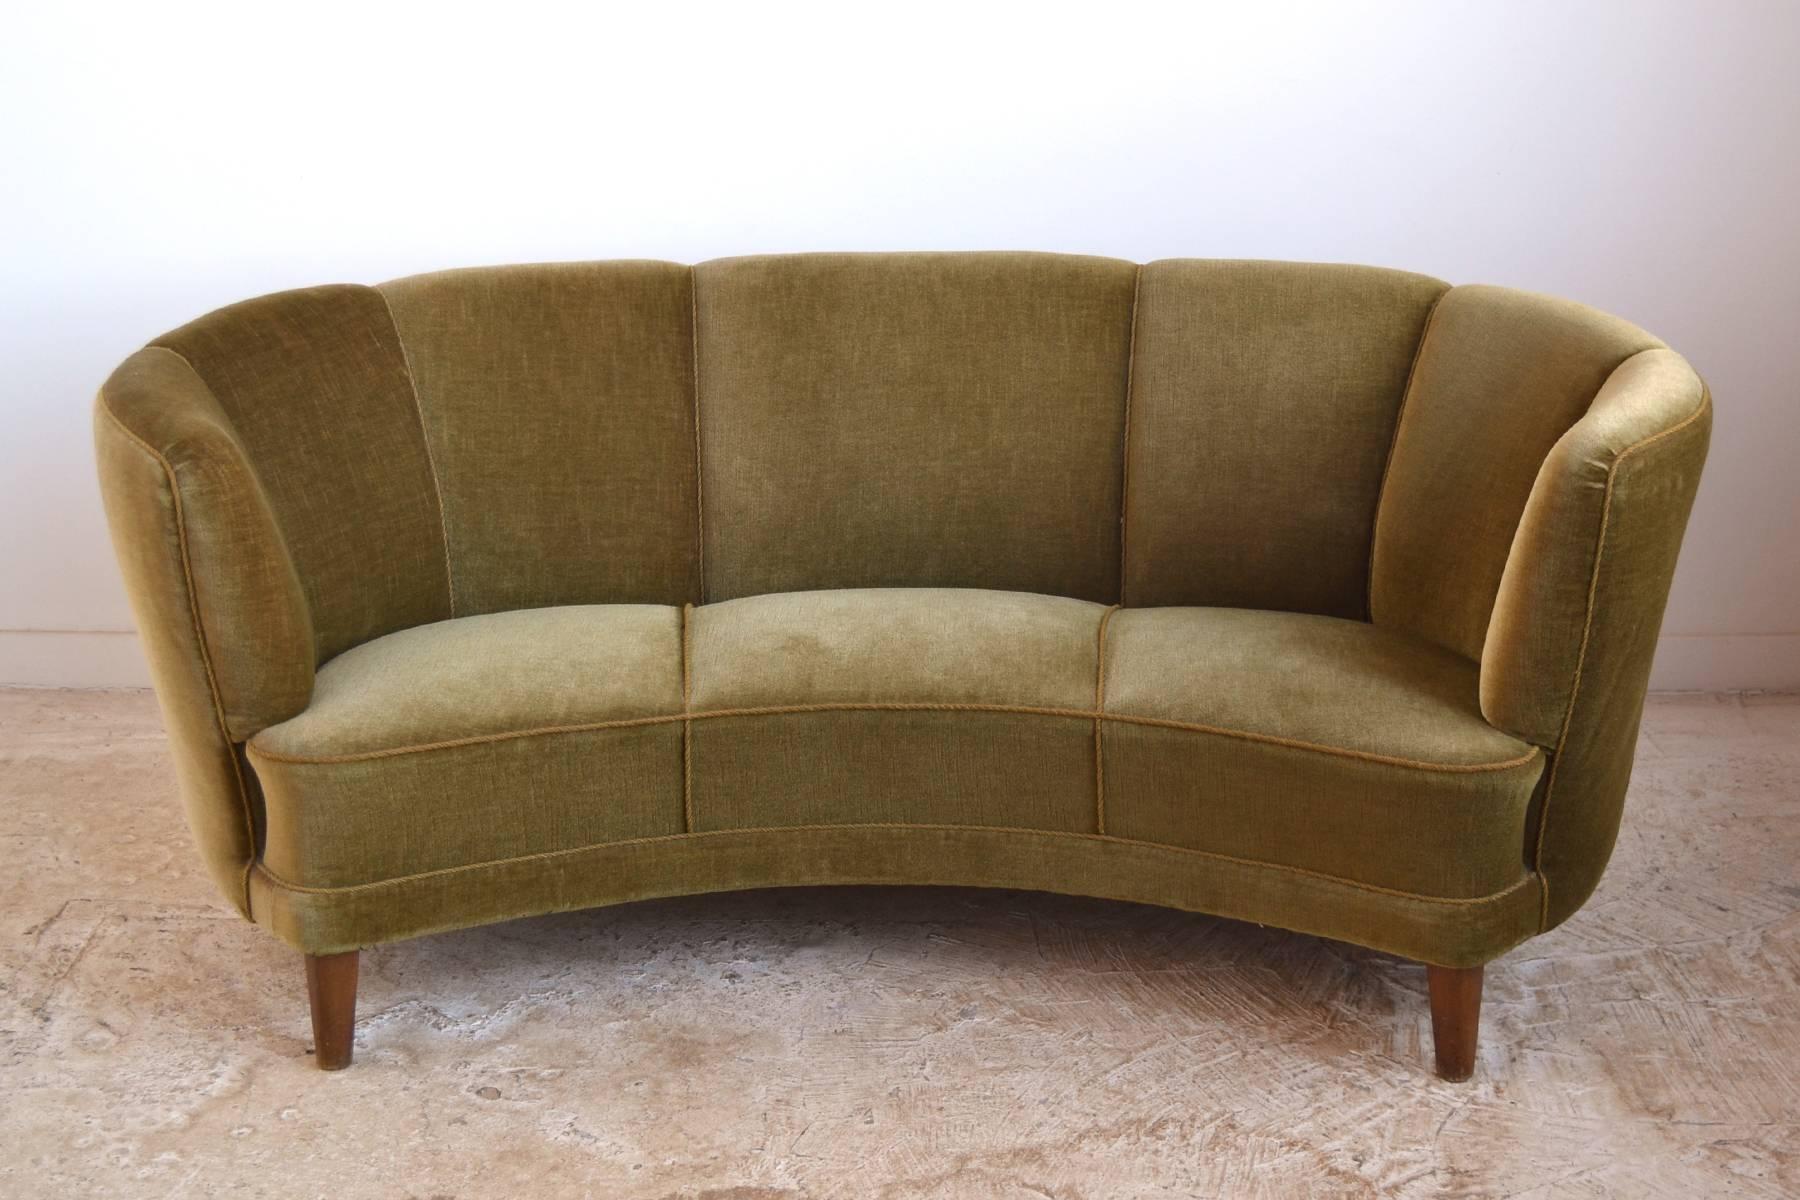 This Swedish sofa represents a transition from the Deco/ Moderne to Mid-Century Modern aesthetic. The elegantly curved form has less adornment, but still retains some very lovely details. It is supported by conical legs in the front, while the back